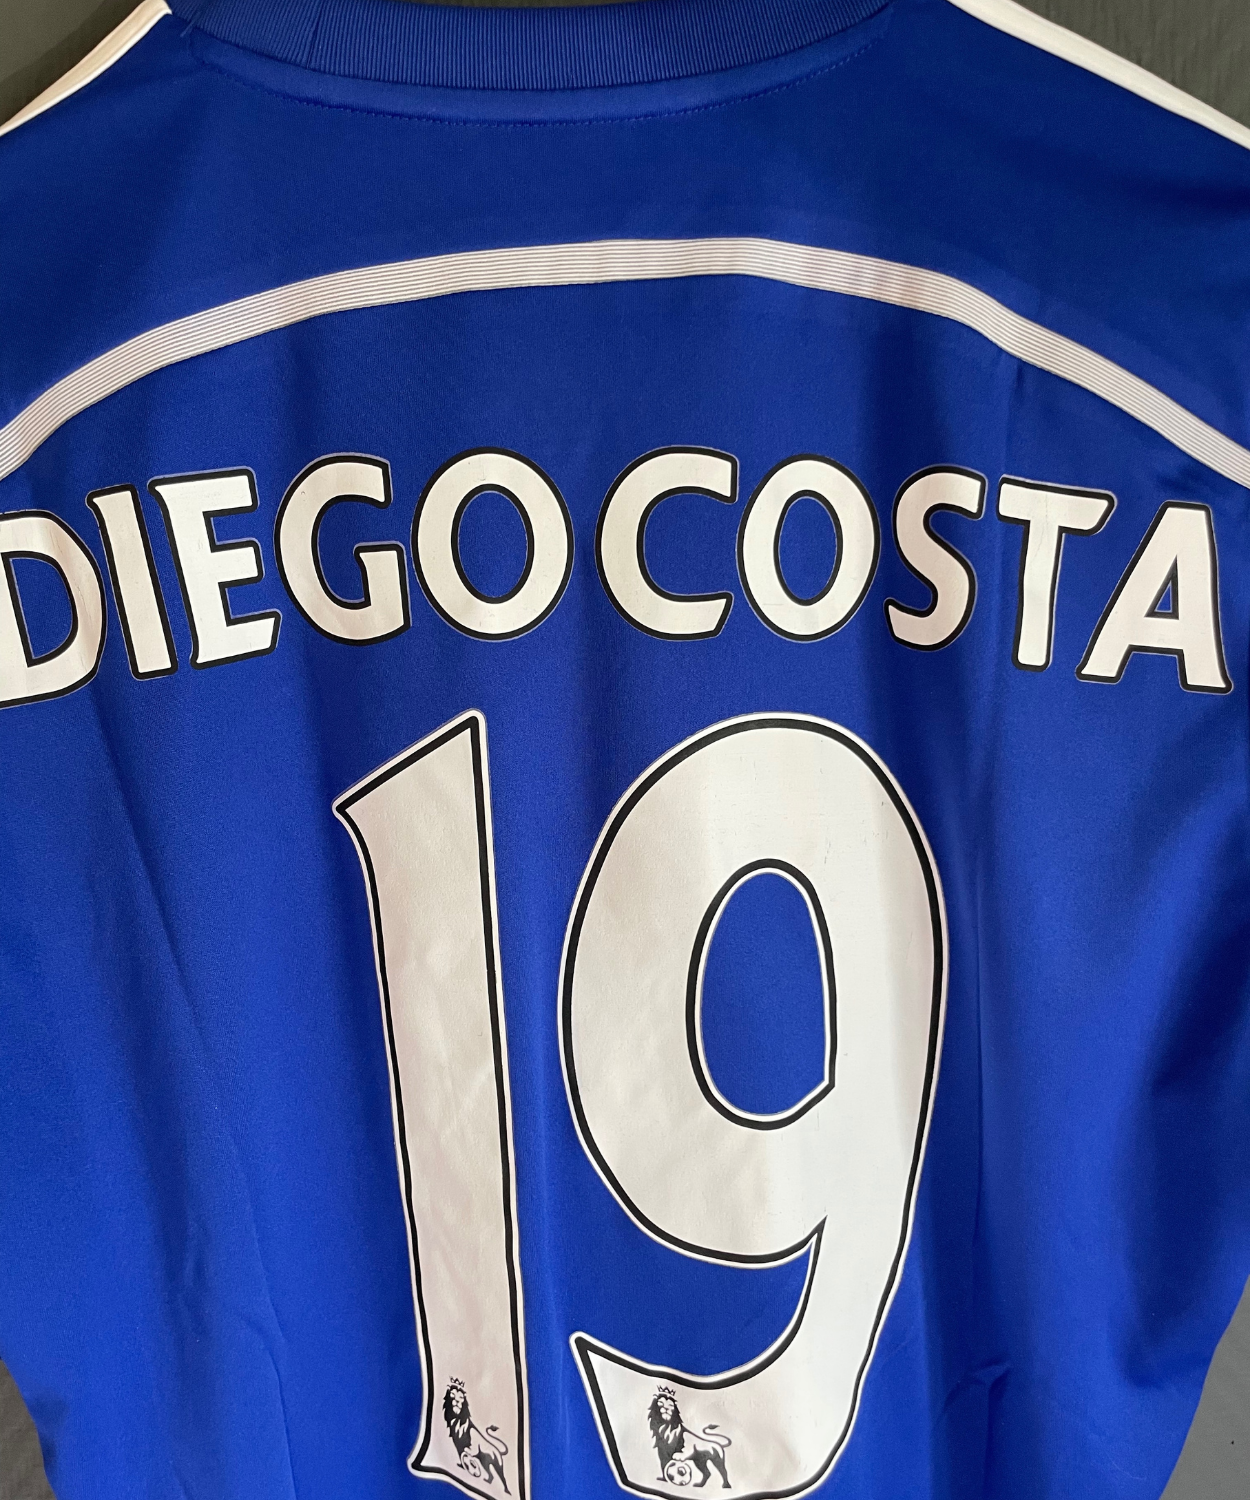 Chelsea FC 2014/15 Diego Costa Home Kit (M)